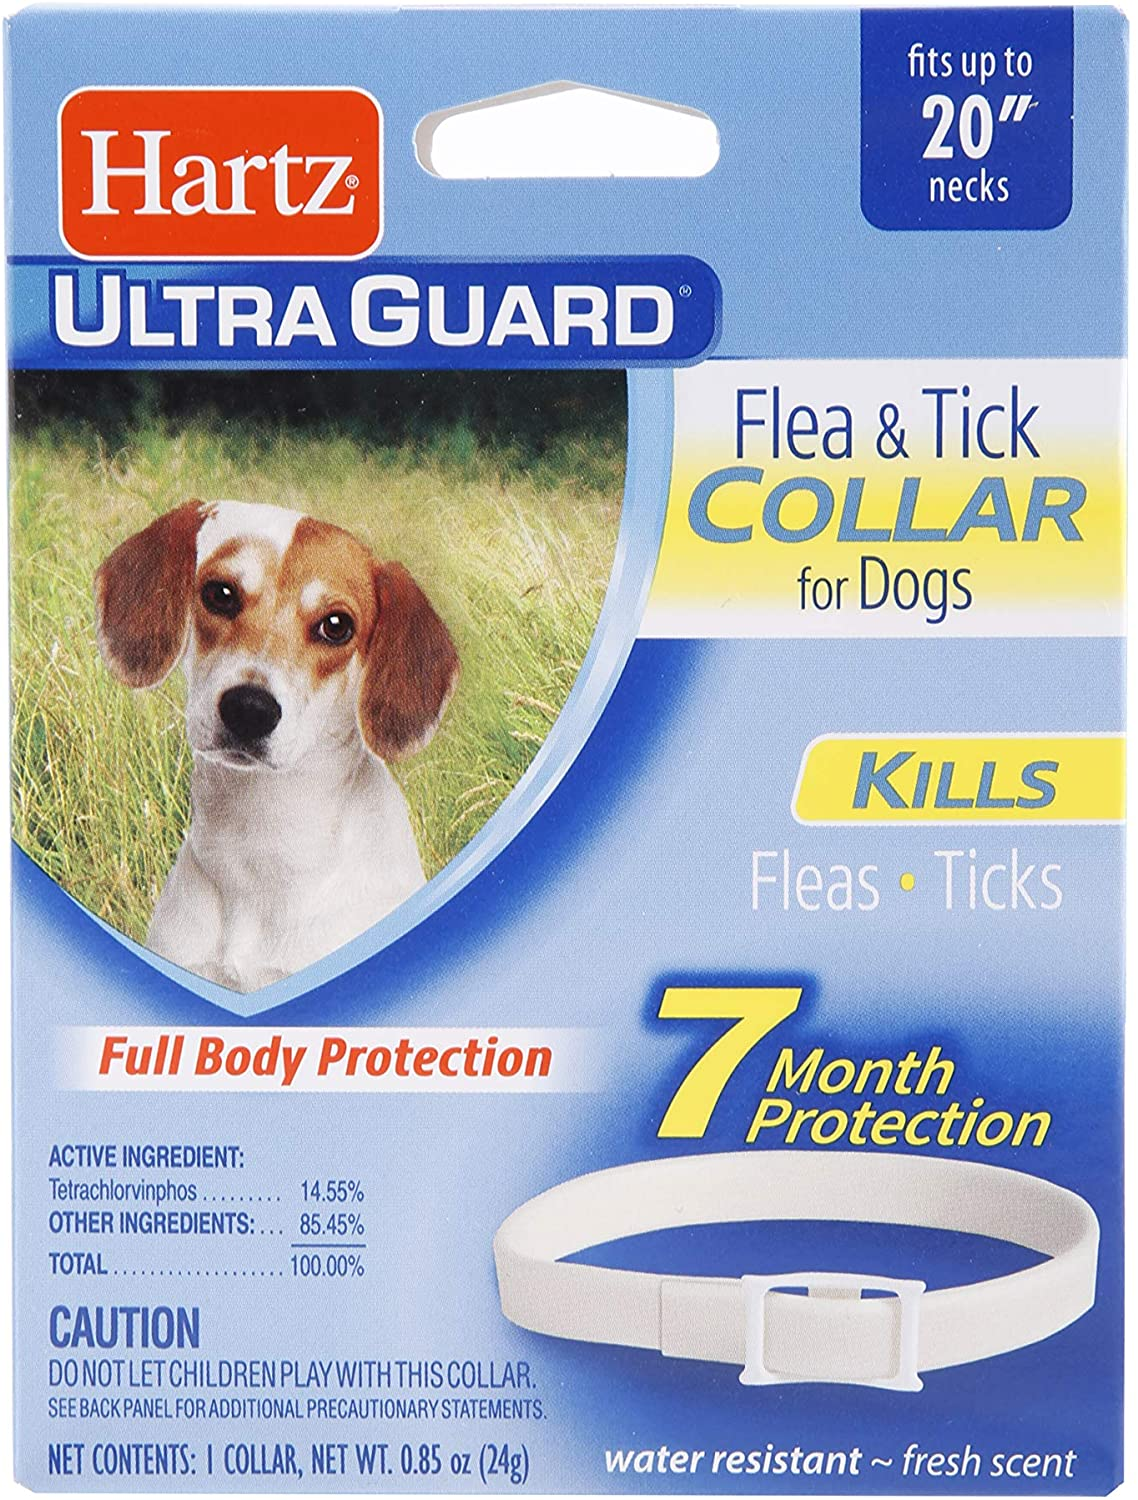 Flea Tick Hartz Dogs We OFFer at cheap prices Collar and for Month Pro Puppies UltraGuard Award